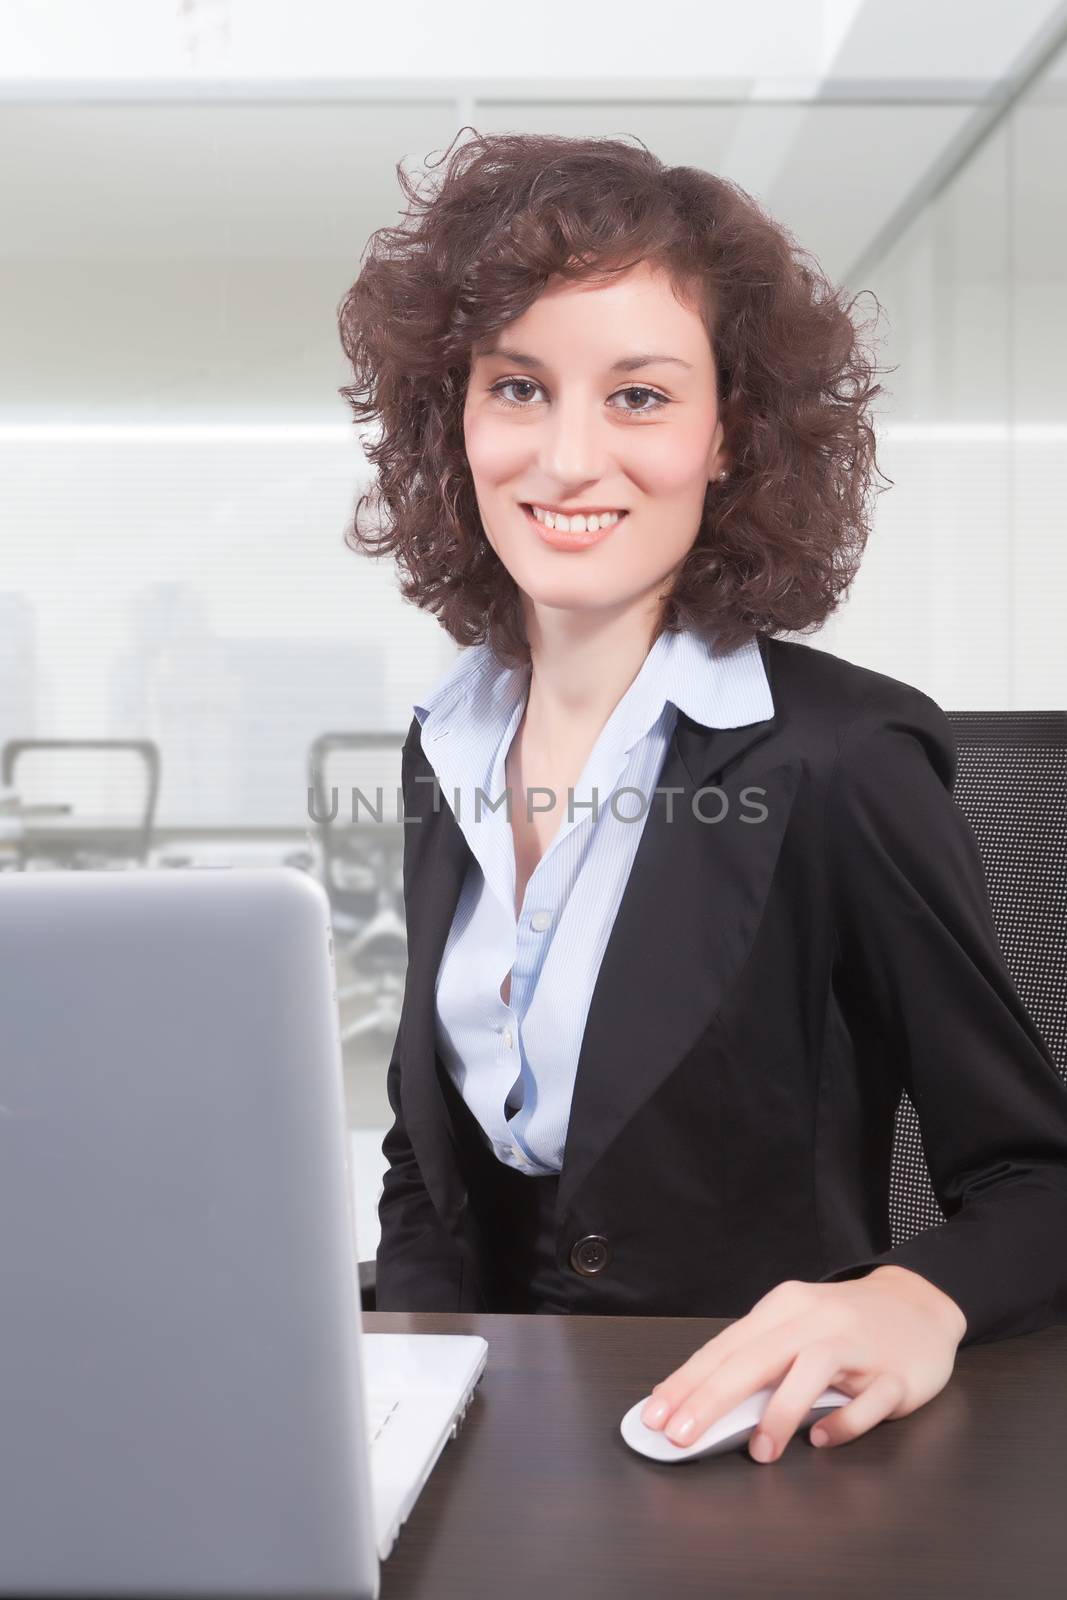 A woman sits at a desk in front of a computer screen.